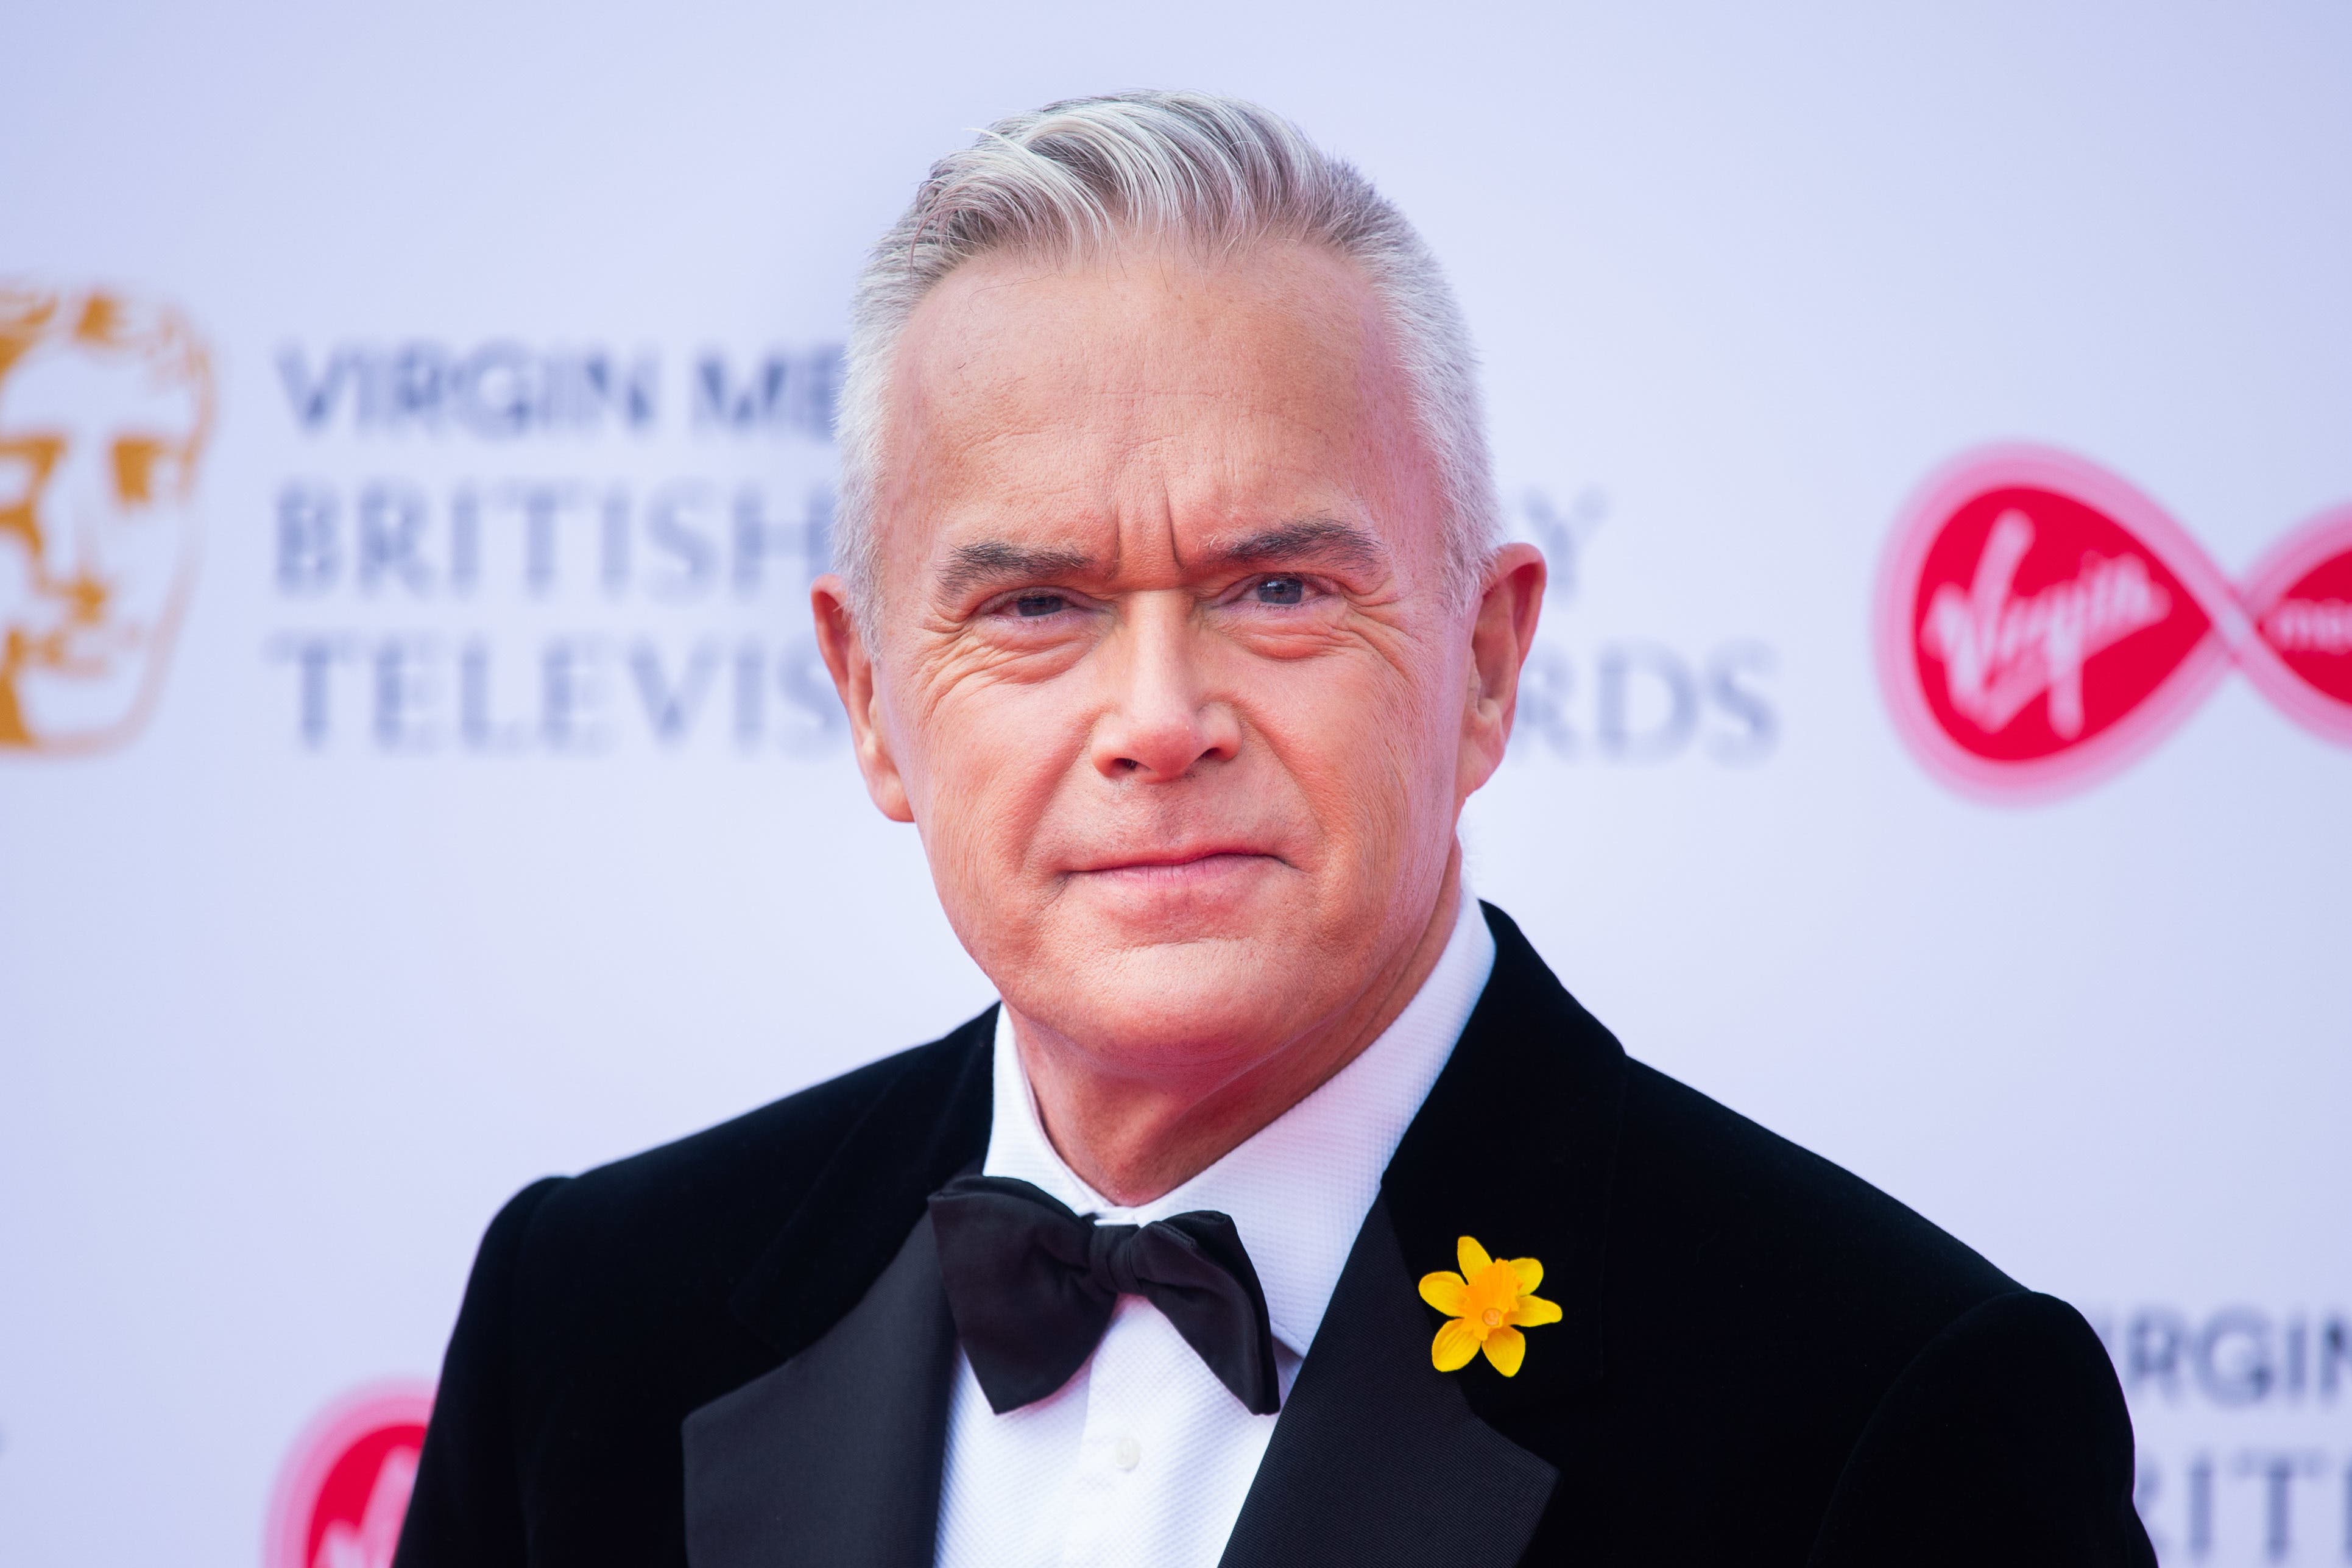 For the moment, Huw Edwards is lying in a hospital bed – and his family are asking for privacy